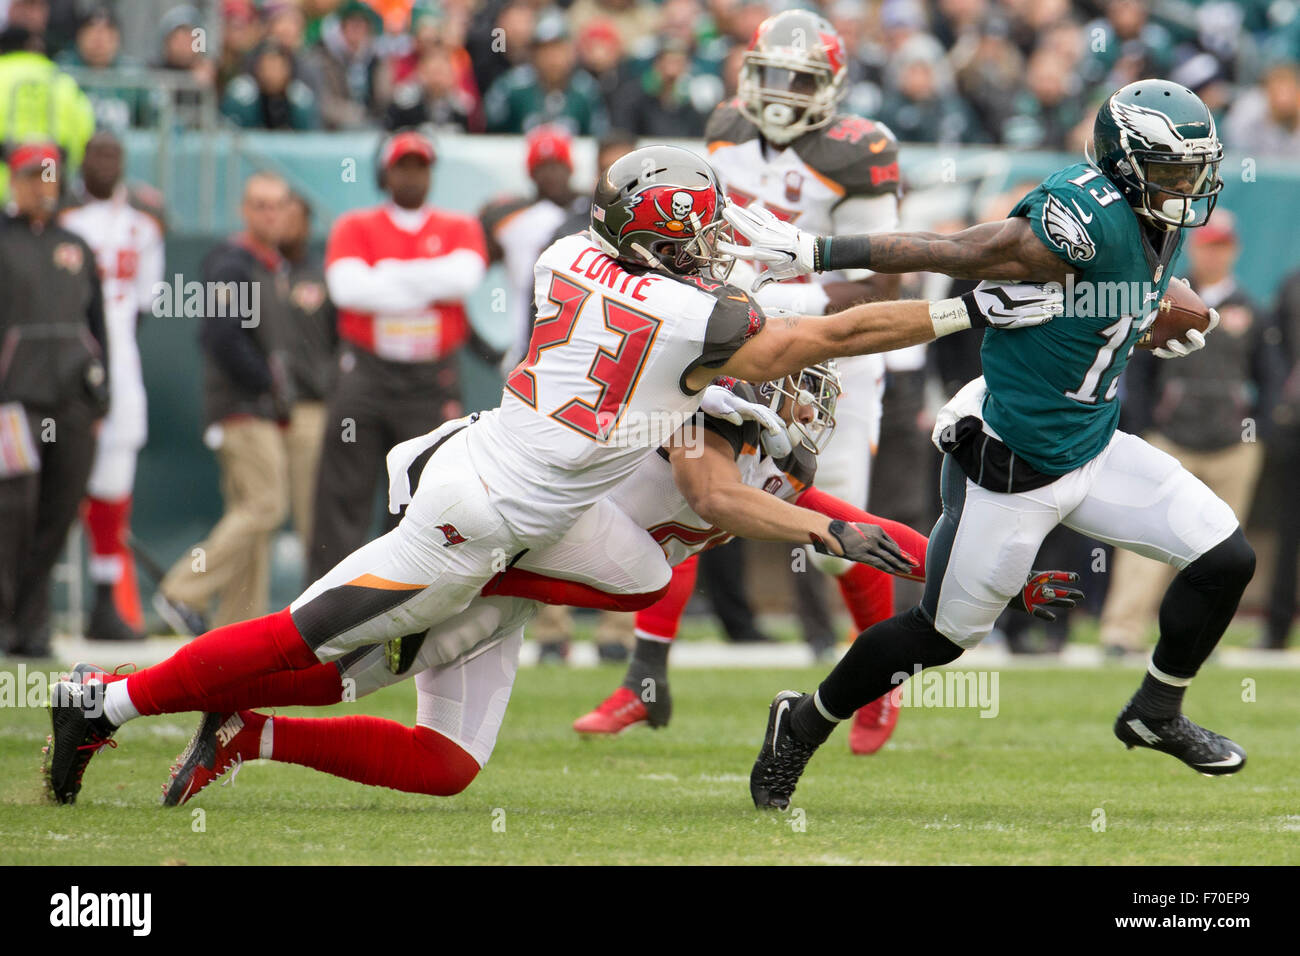 Philadelphia, Pennsylvania, USA. 22nd Nov, 2015. Philadelphia Eagles wide receiver Josh Huff (13) runs away from Tampa Bay Buccaneers strong safety Chris Conte (23) and cornerback Sterling Moore (26) as he heads towards a touchdown during the NFL game between the Tampa Bay Buccaneers and the Philadelphia Eagles at Lincoln Financial Field in Philadelphia, Pennsylvania. The Tampa Bay Buccaneers won 45-17. Christopher Szagola/CSM/Alamy Live News Stock Photo